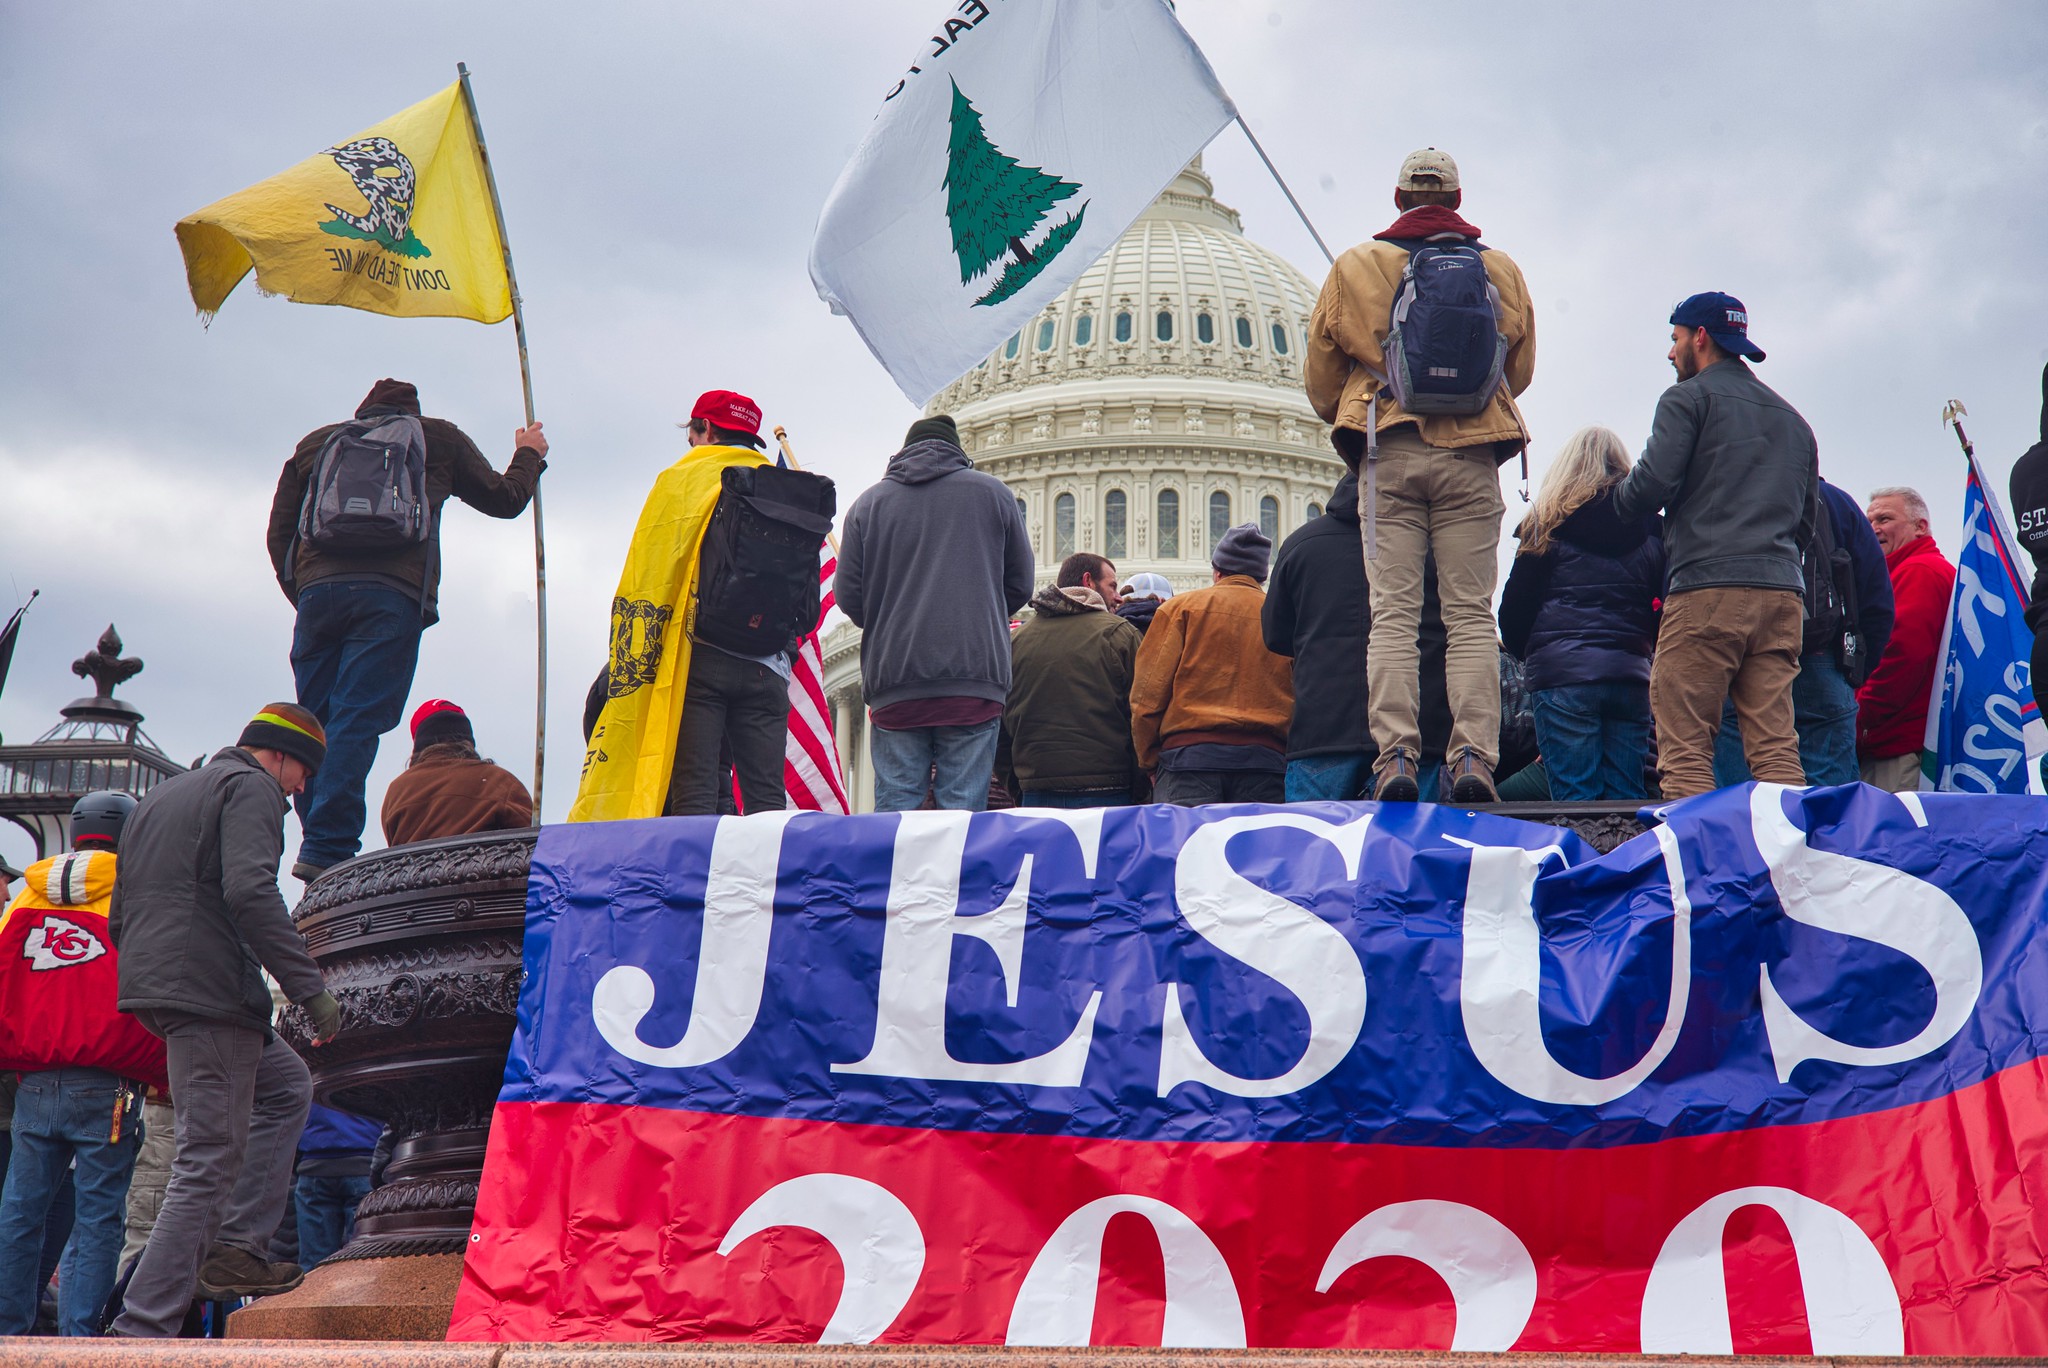 Christian nationalism after Trump remains a powerful and